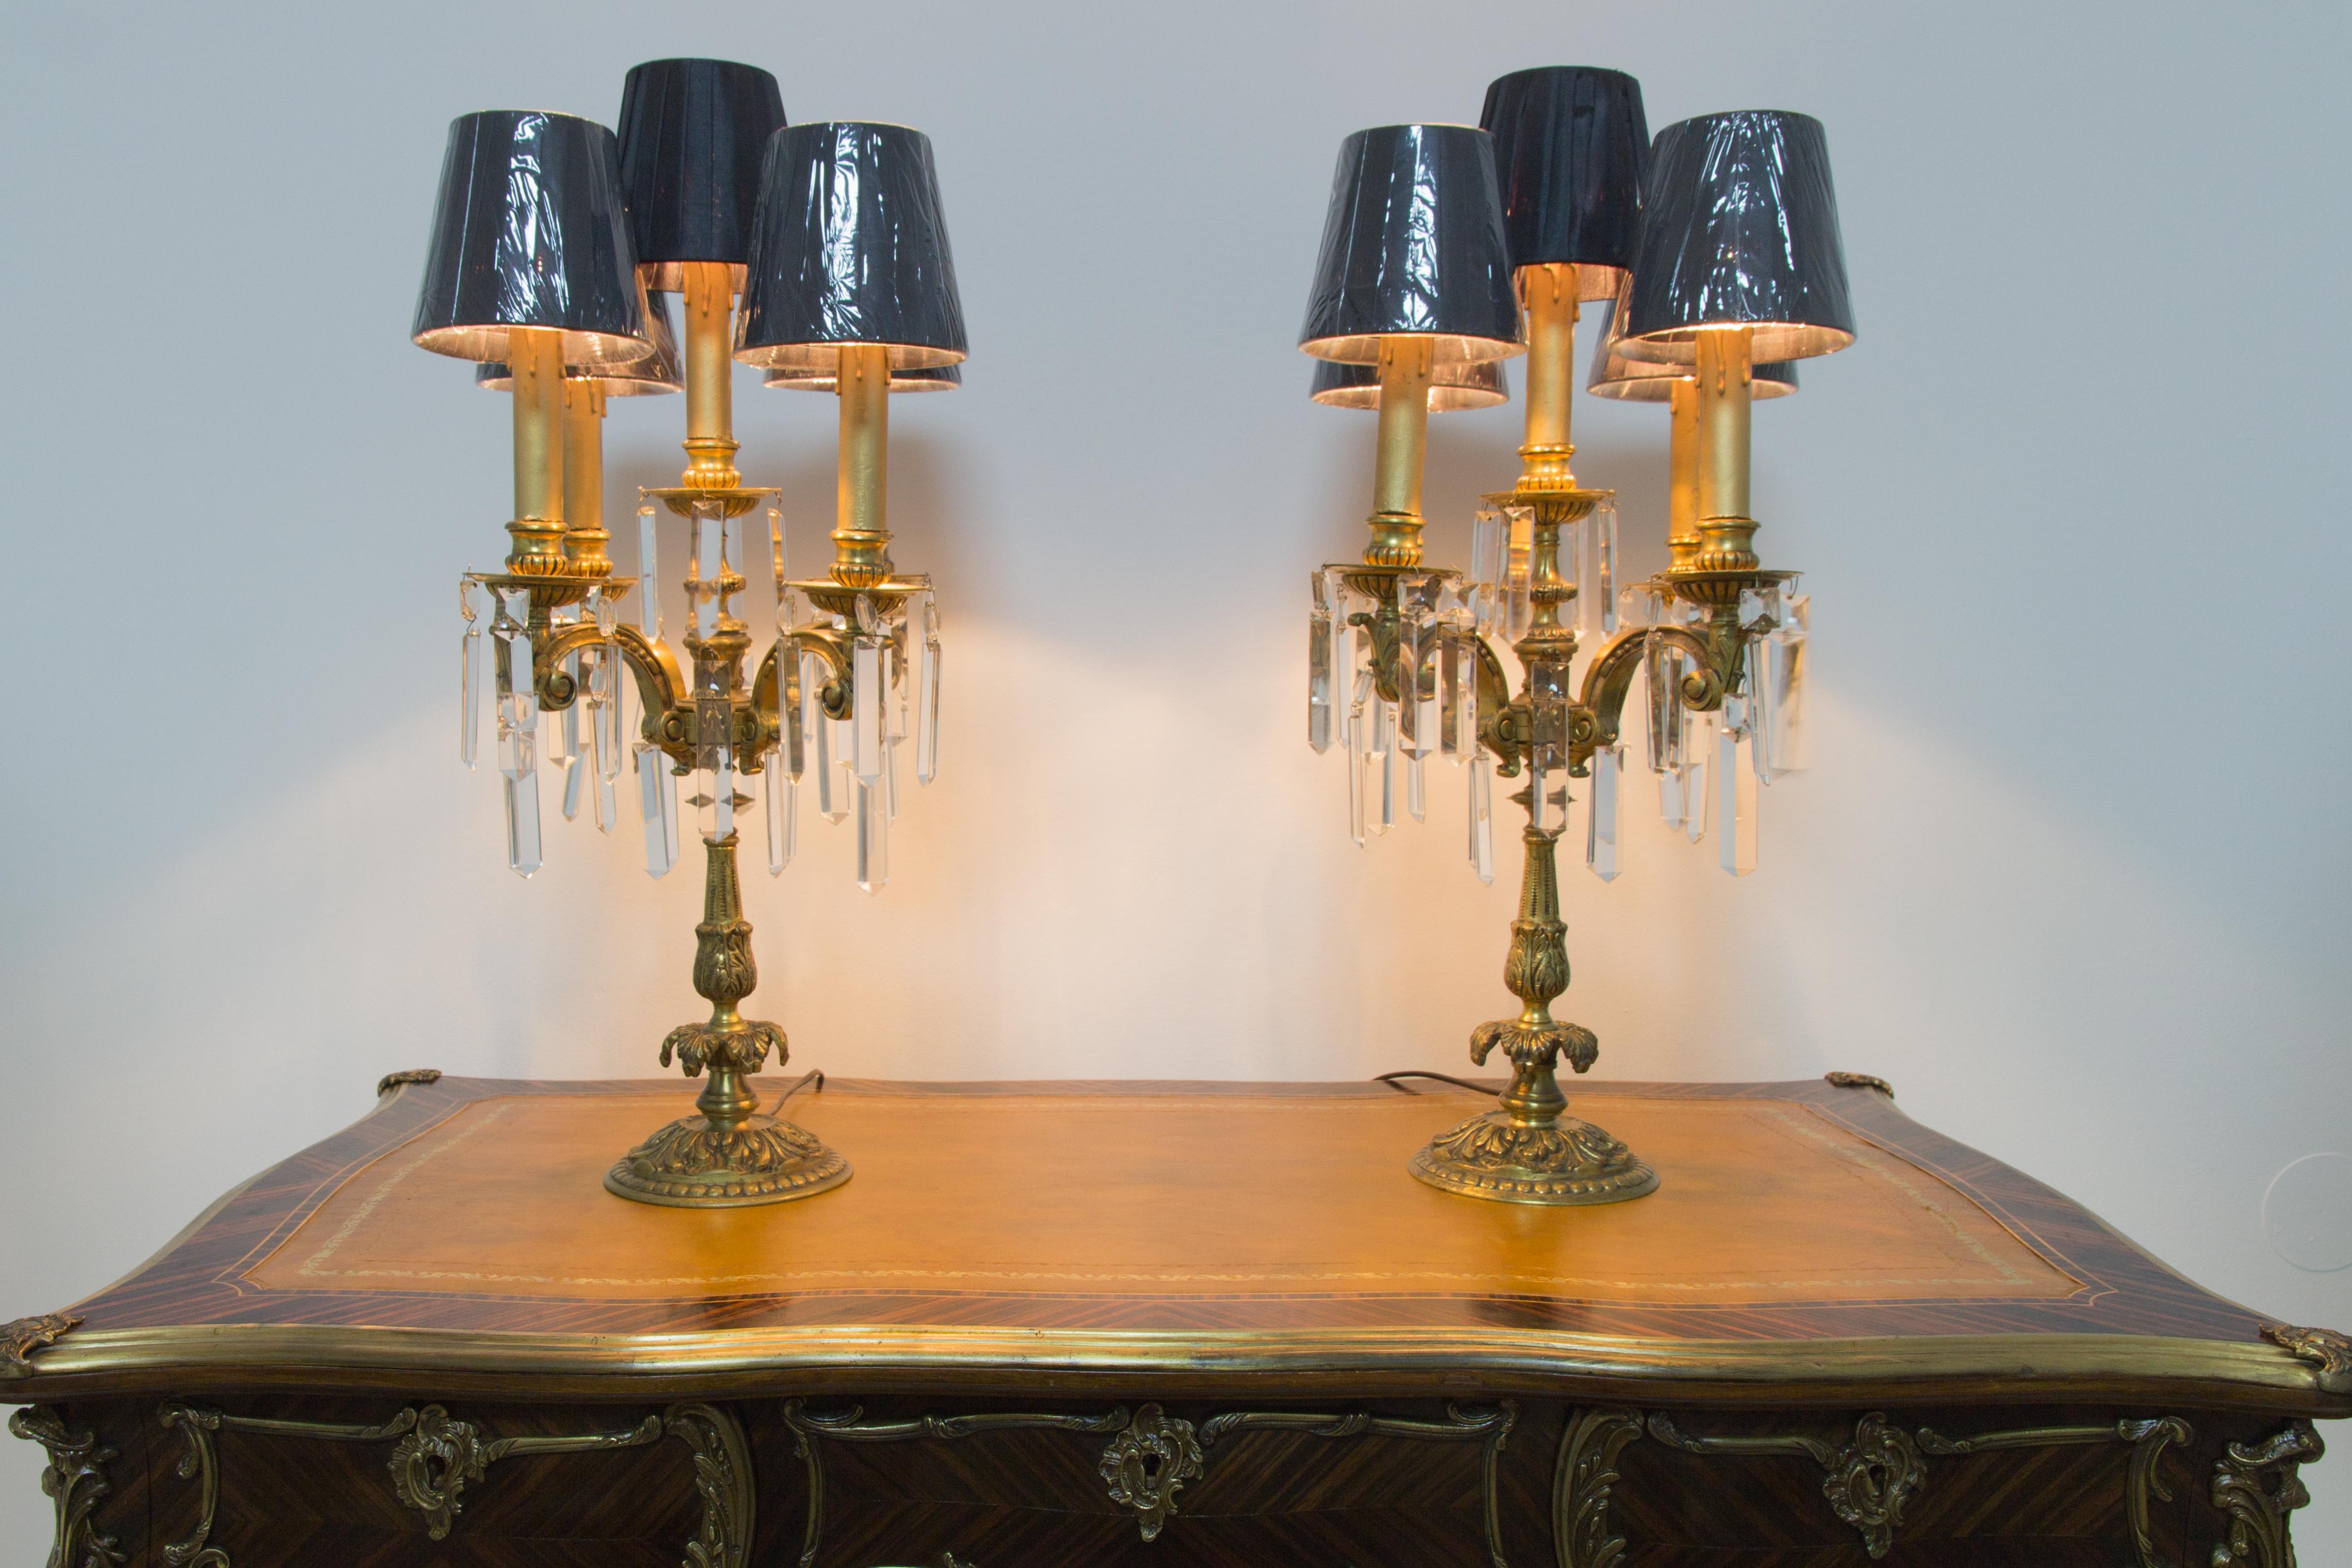 Pair of French Louis XVI style bronze and crystal candelabra table lamps. Each lamp has five bronze arms, embellished with hanging cut crystal prisms. Lamps have E14 size light bulb sockets and new black fabric lampshades. France, 1920s.
Each lamp